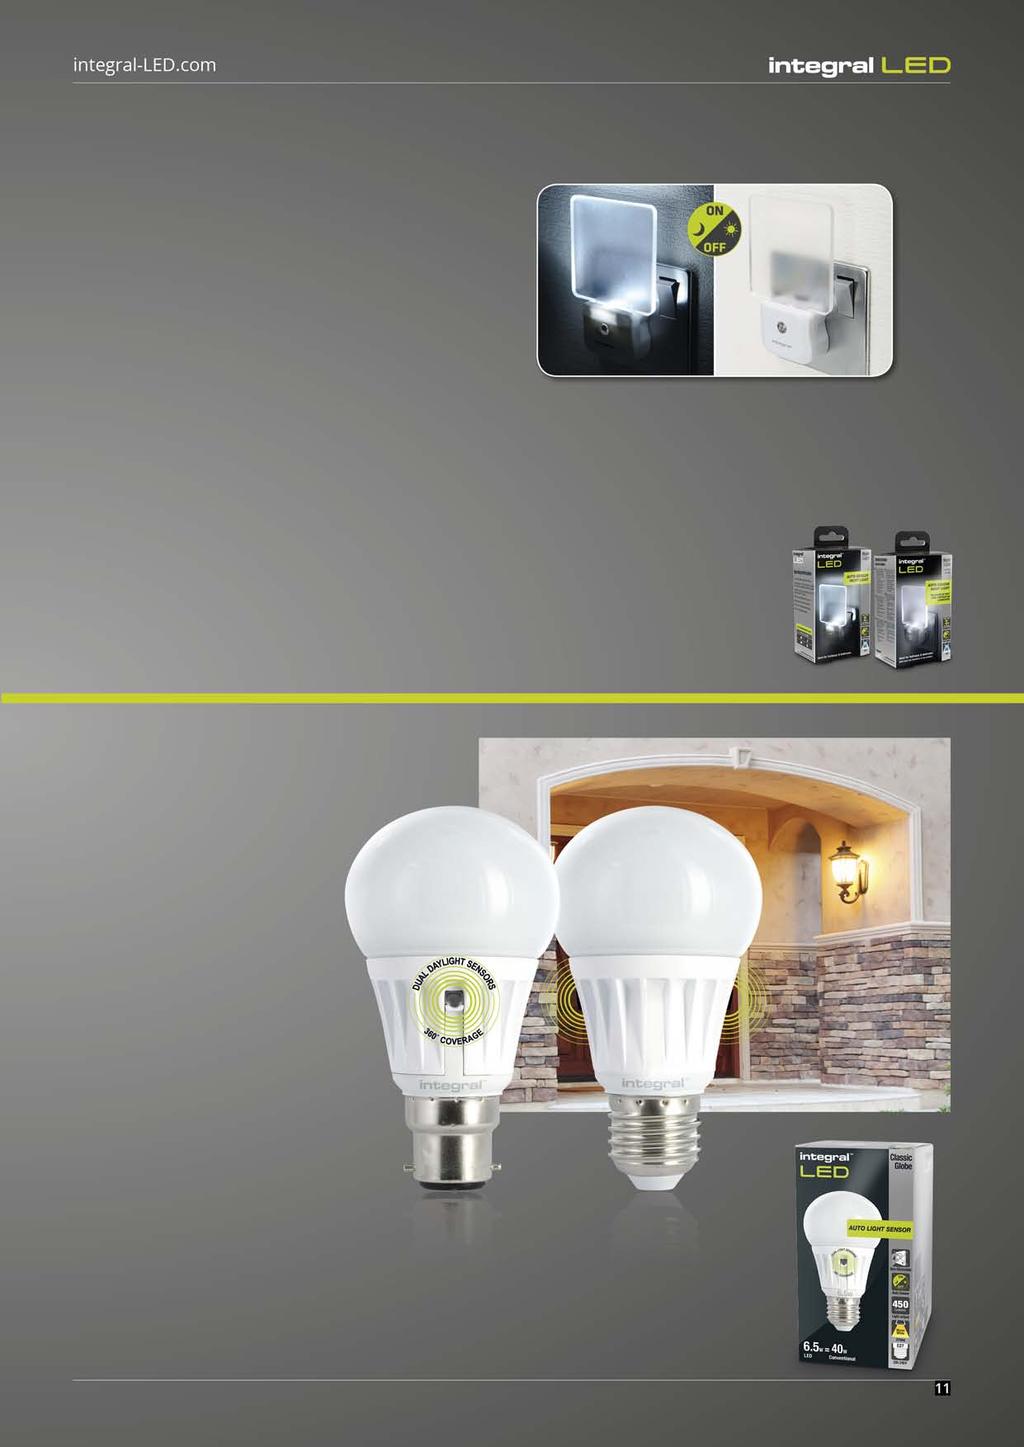 LED Night Light - Auto-sensor Light up your hallway or any room with a soft, gentle, cool light.